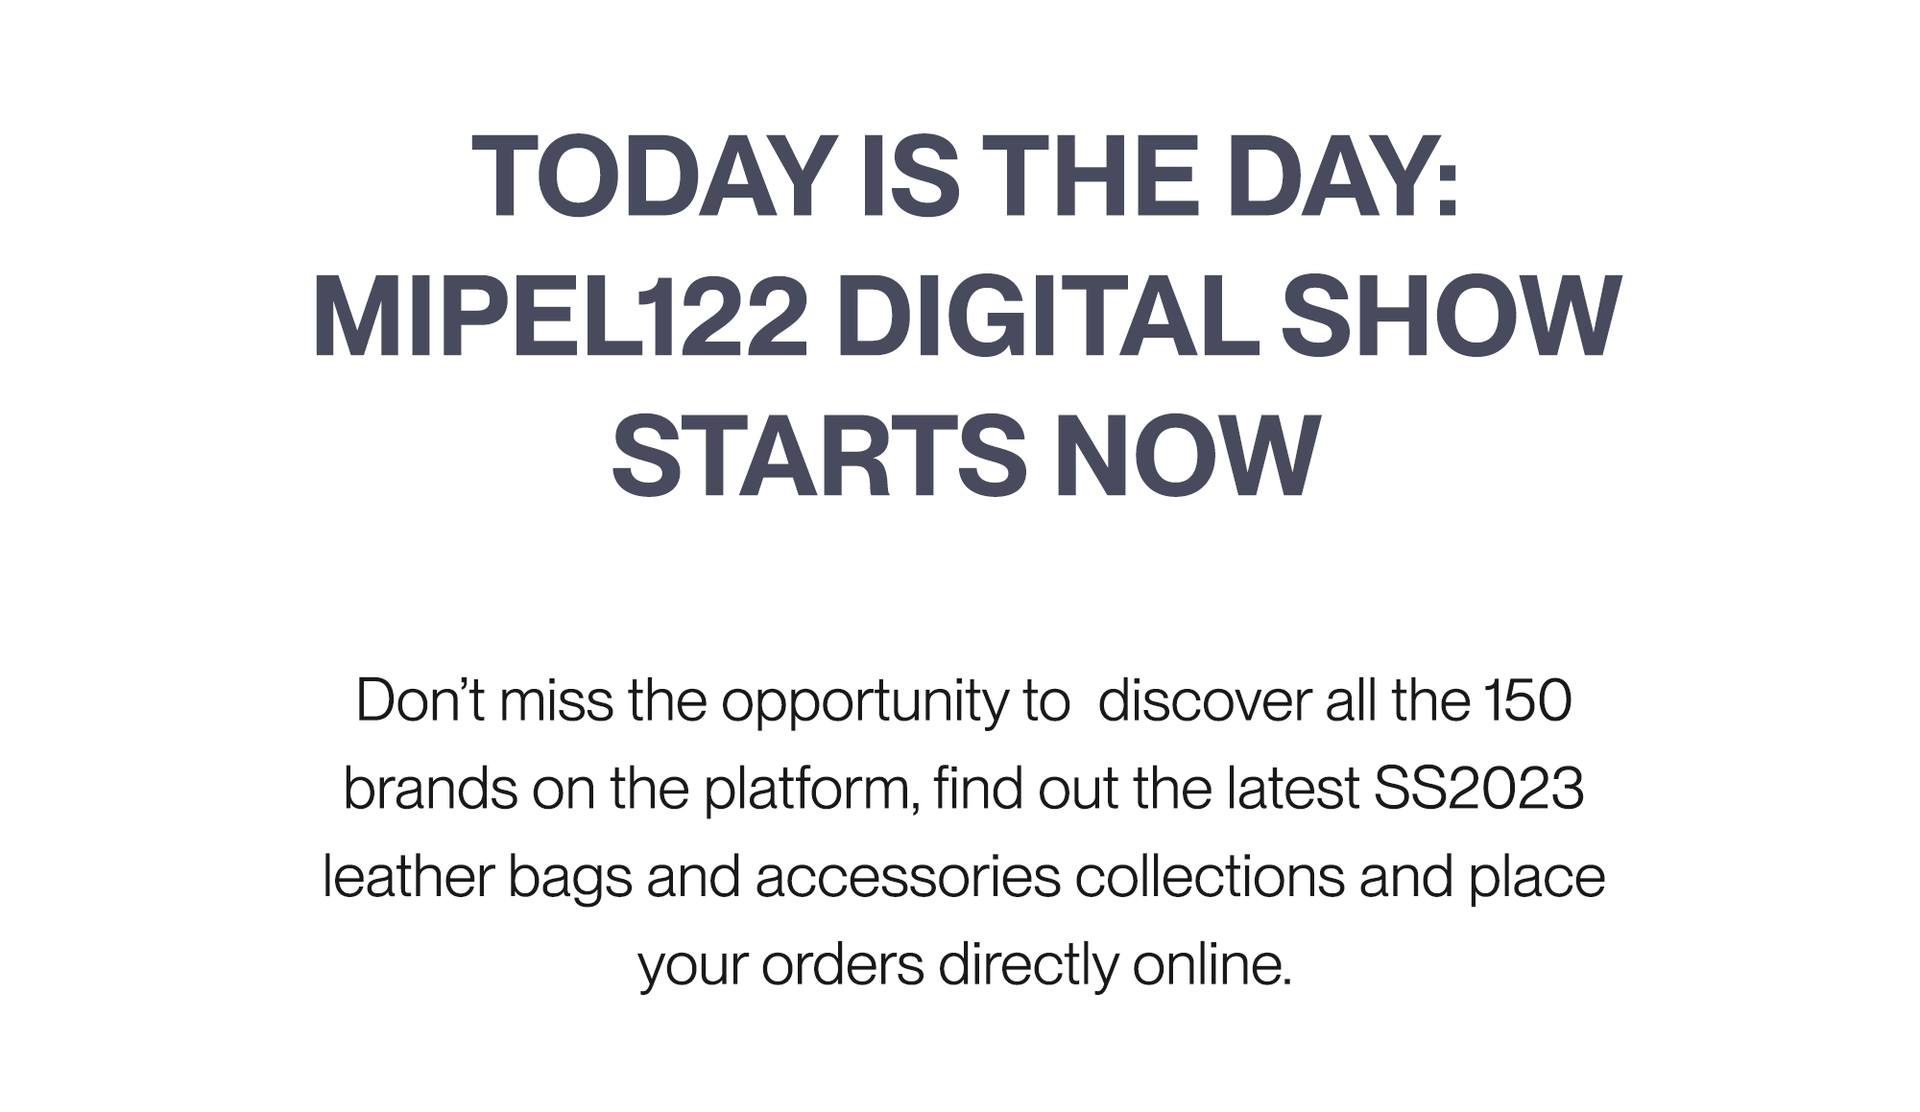 TODAY IS THE DAY: MIPEL122 DIGITAL SHOW STARTS NOW!